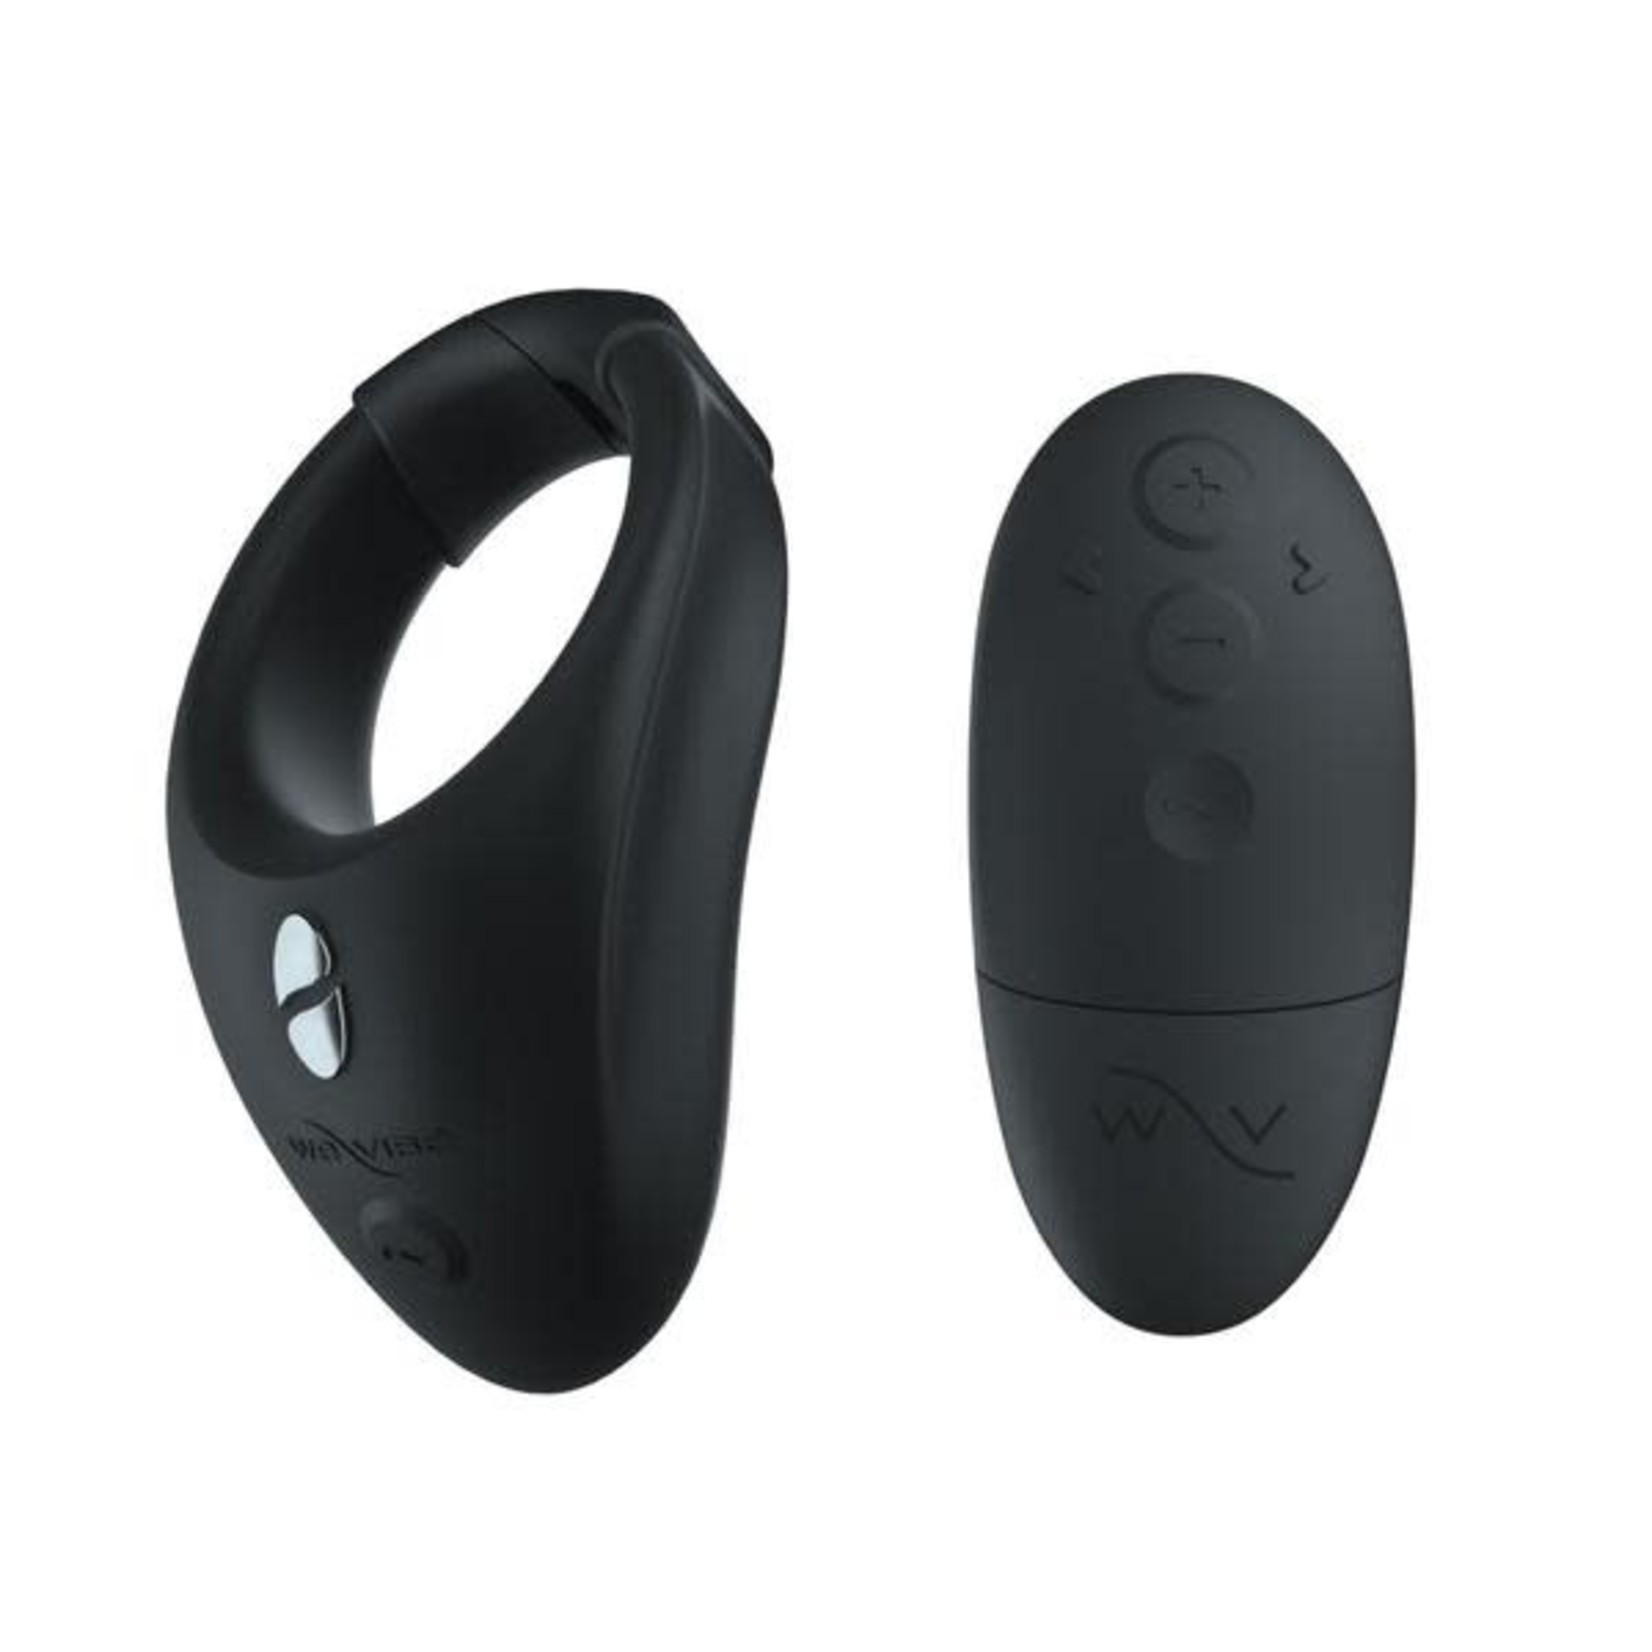 WE-VIBE WE-VIBE - BOND - WEARABLE COCK RING WITH REMOTE CONTROL - BLACK